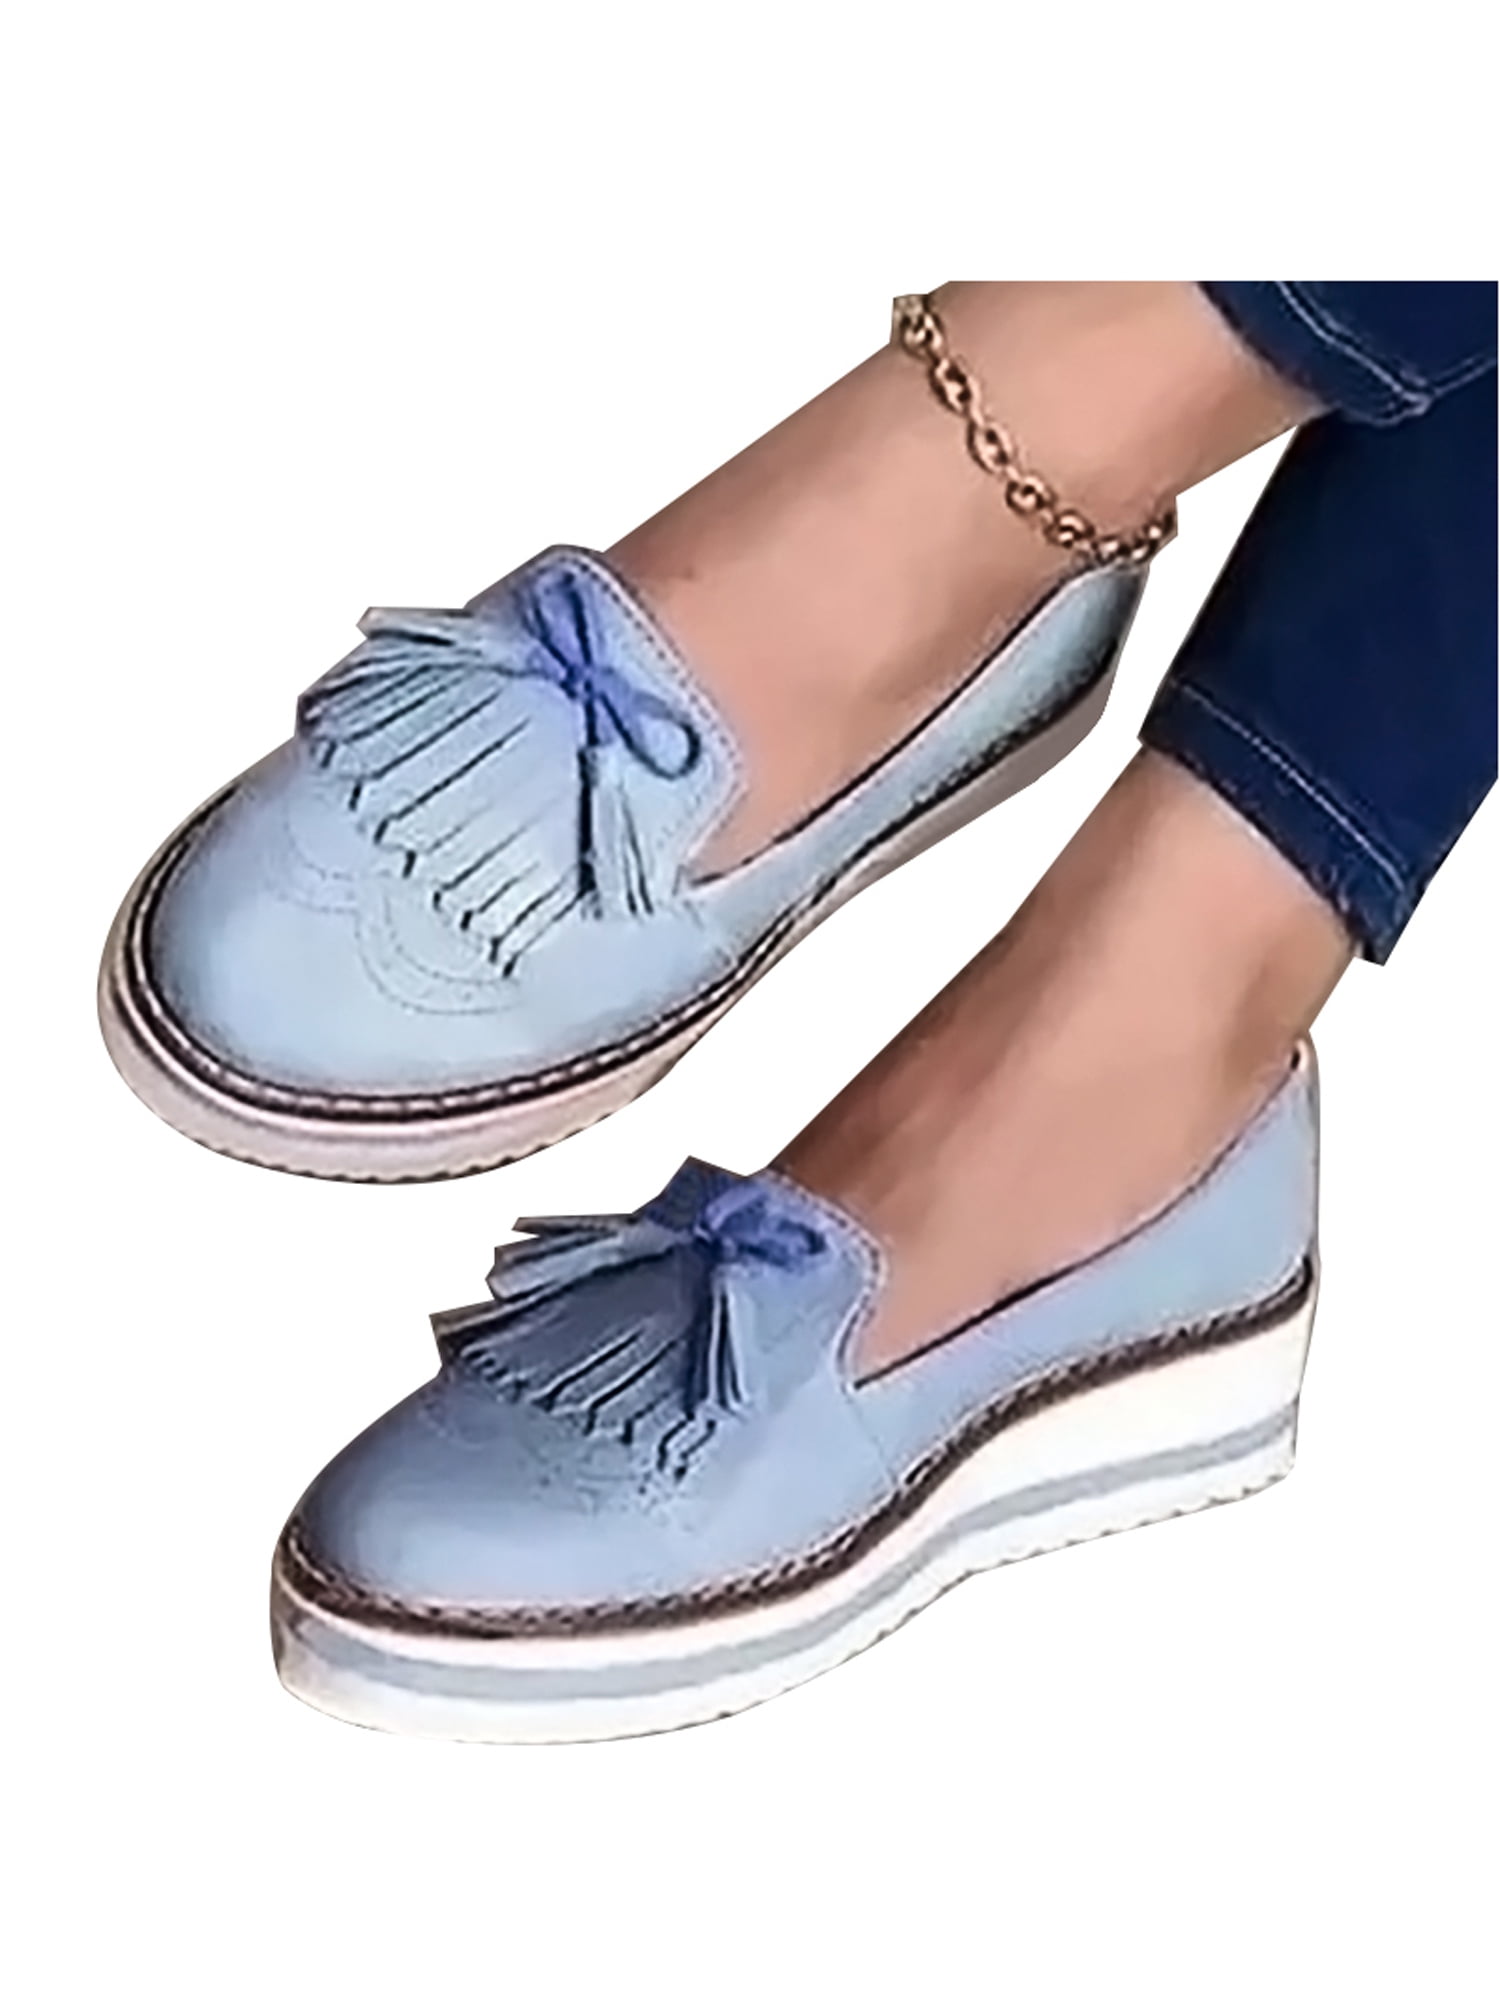 Flats Lace Up Sneakers for Womens Lightweight Nursing Shoes Trainers Cute Loafer 